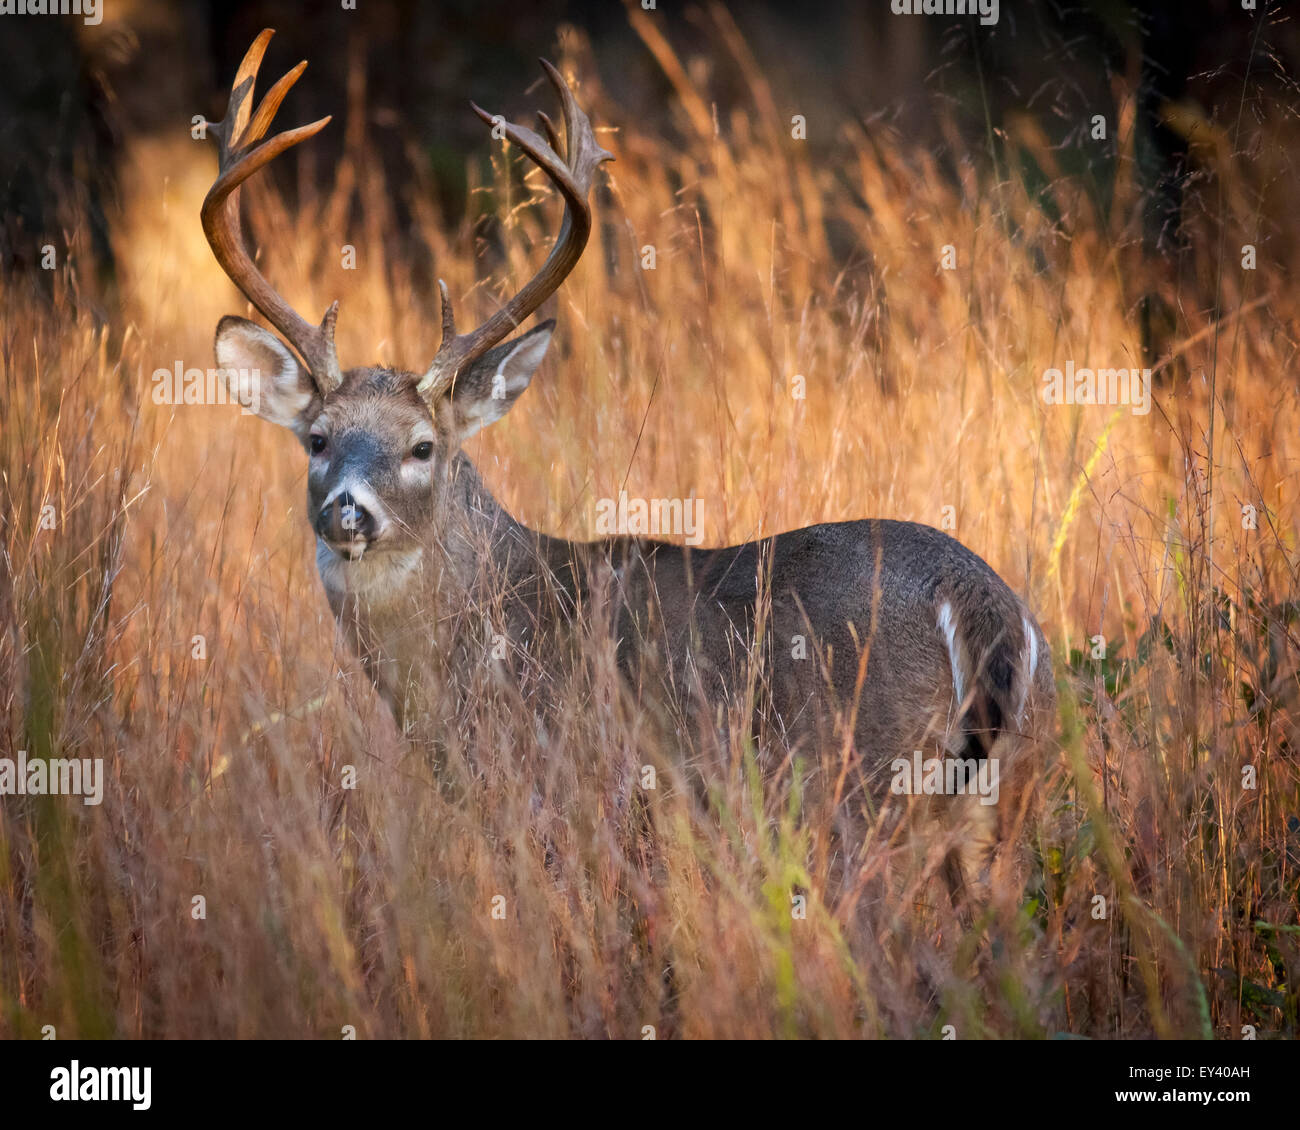 Male deer with antlers at sunrise, camouflaged by tall grass. Stock Photo